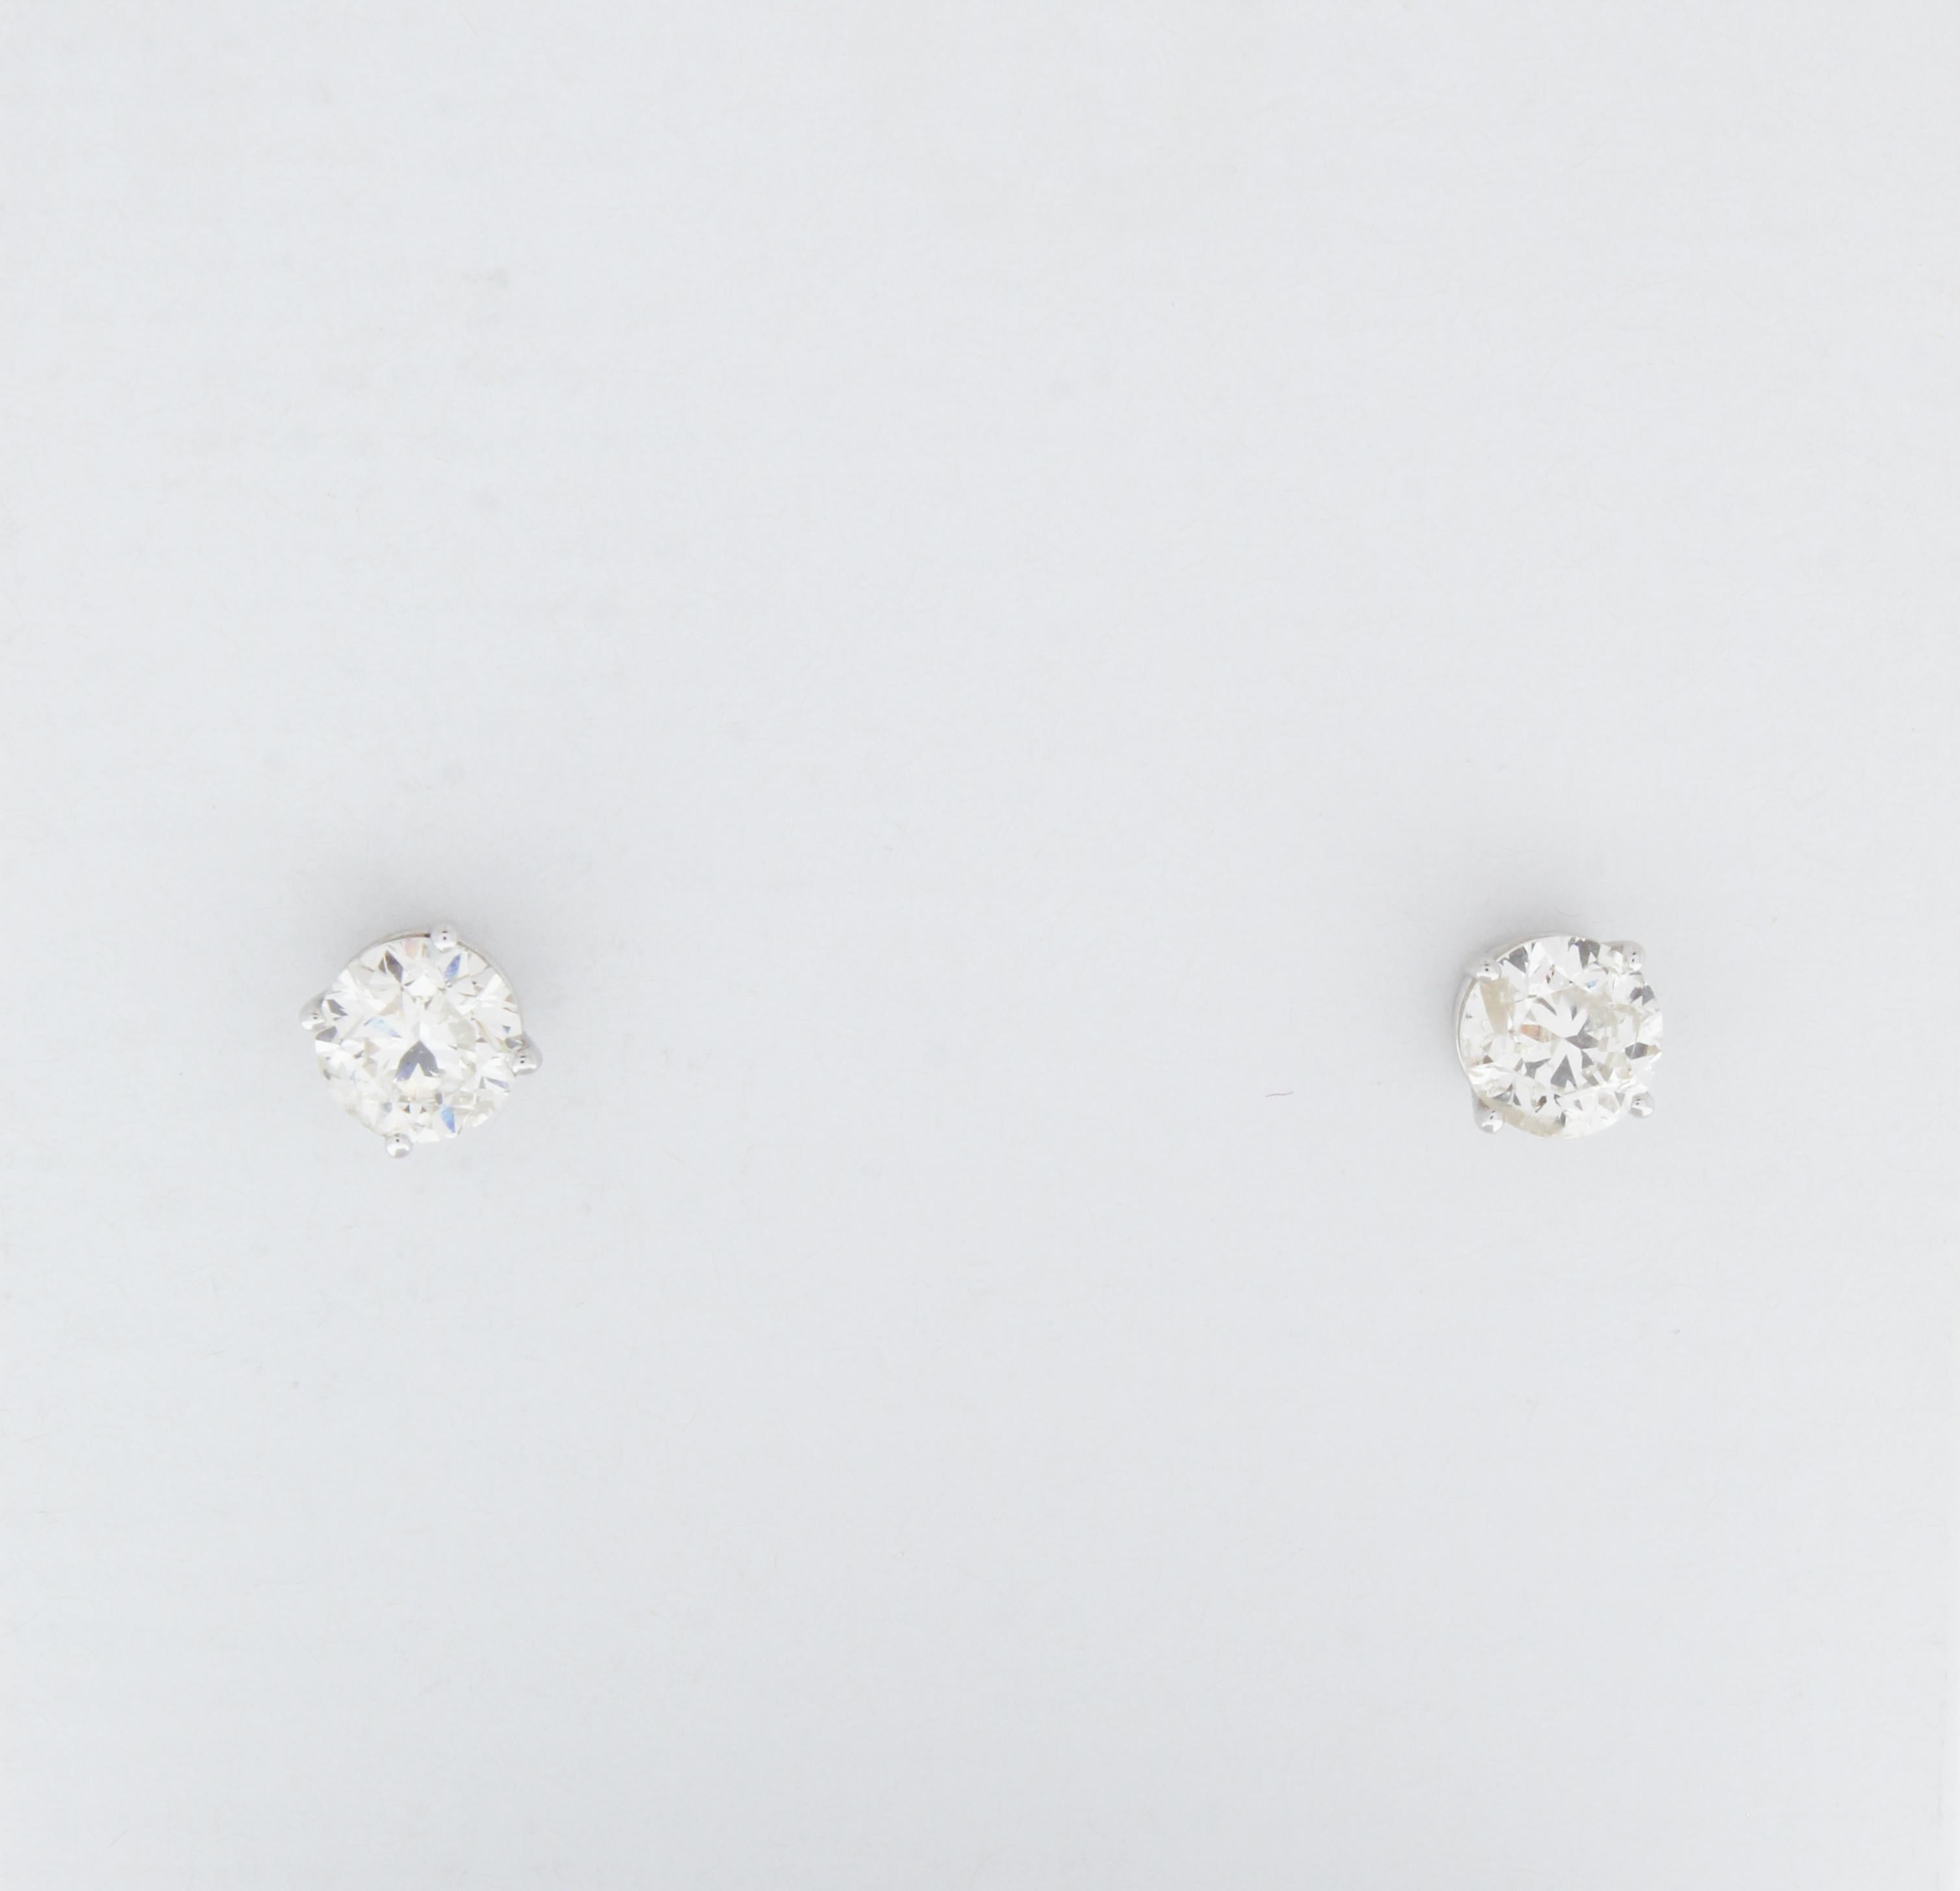 Round Cut 2.00 Carat Total Diamond Stud Earrings in 14k White Gold			 For Sale